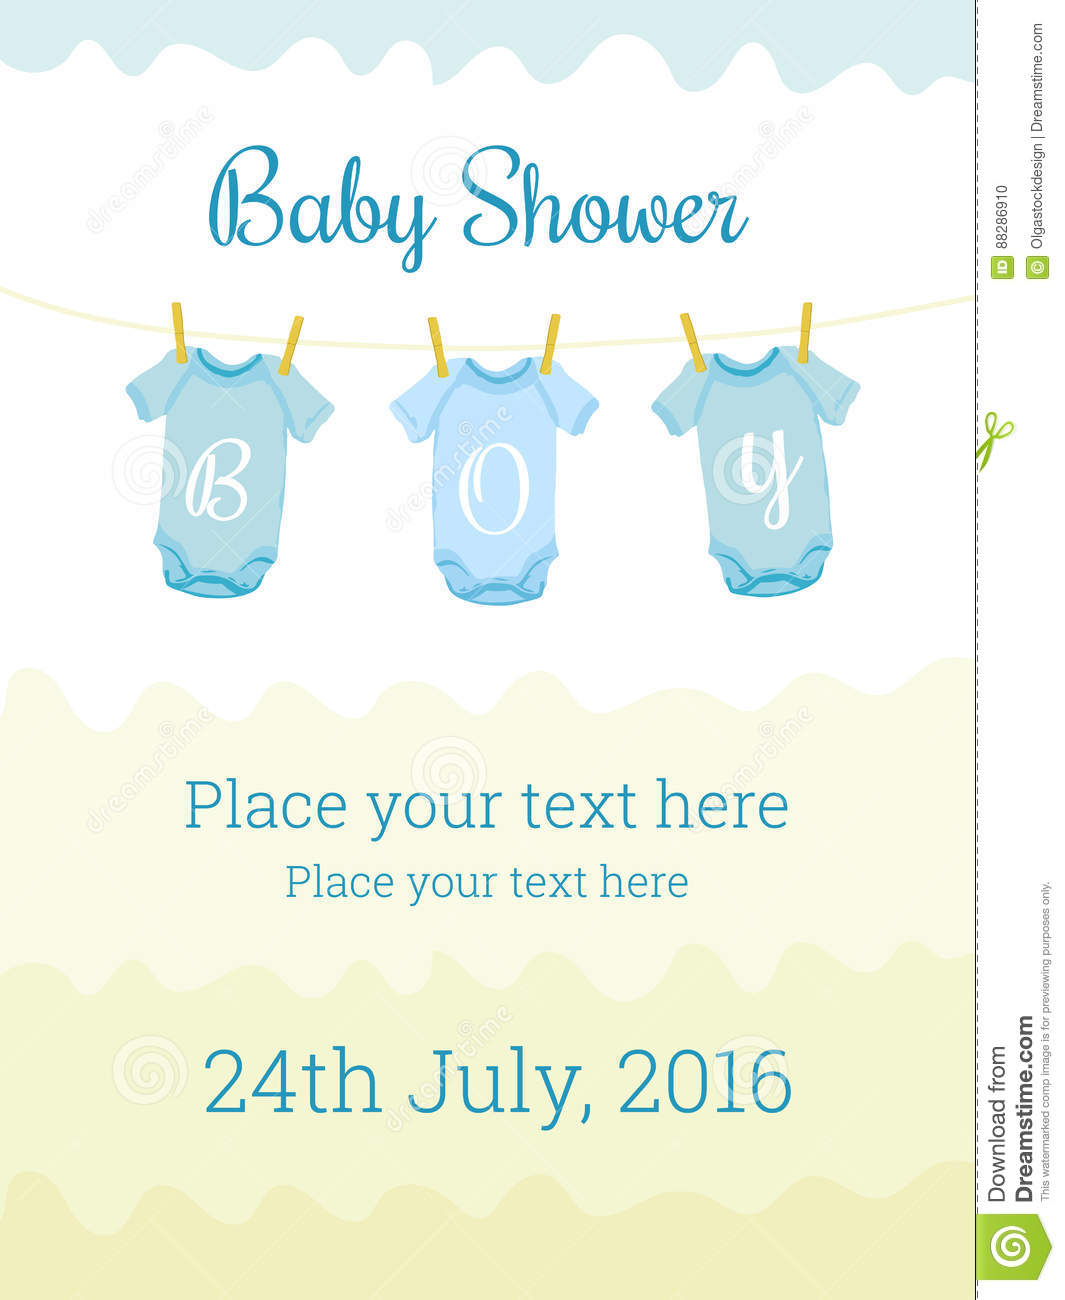 Baby Shower Invitation Card Template For Boy Stock Vector  Pertaining To Baby Shower Invitation Flyer Template In Baby Shower Invitation Flyer Template